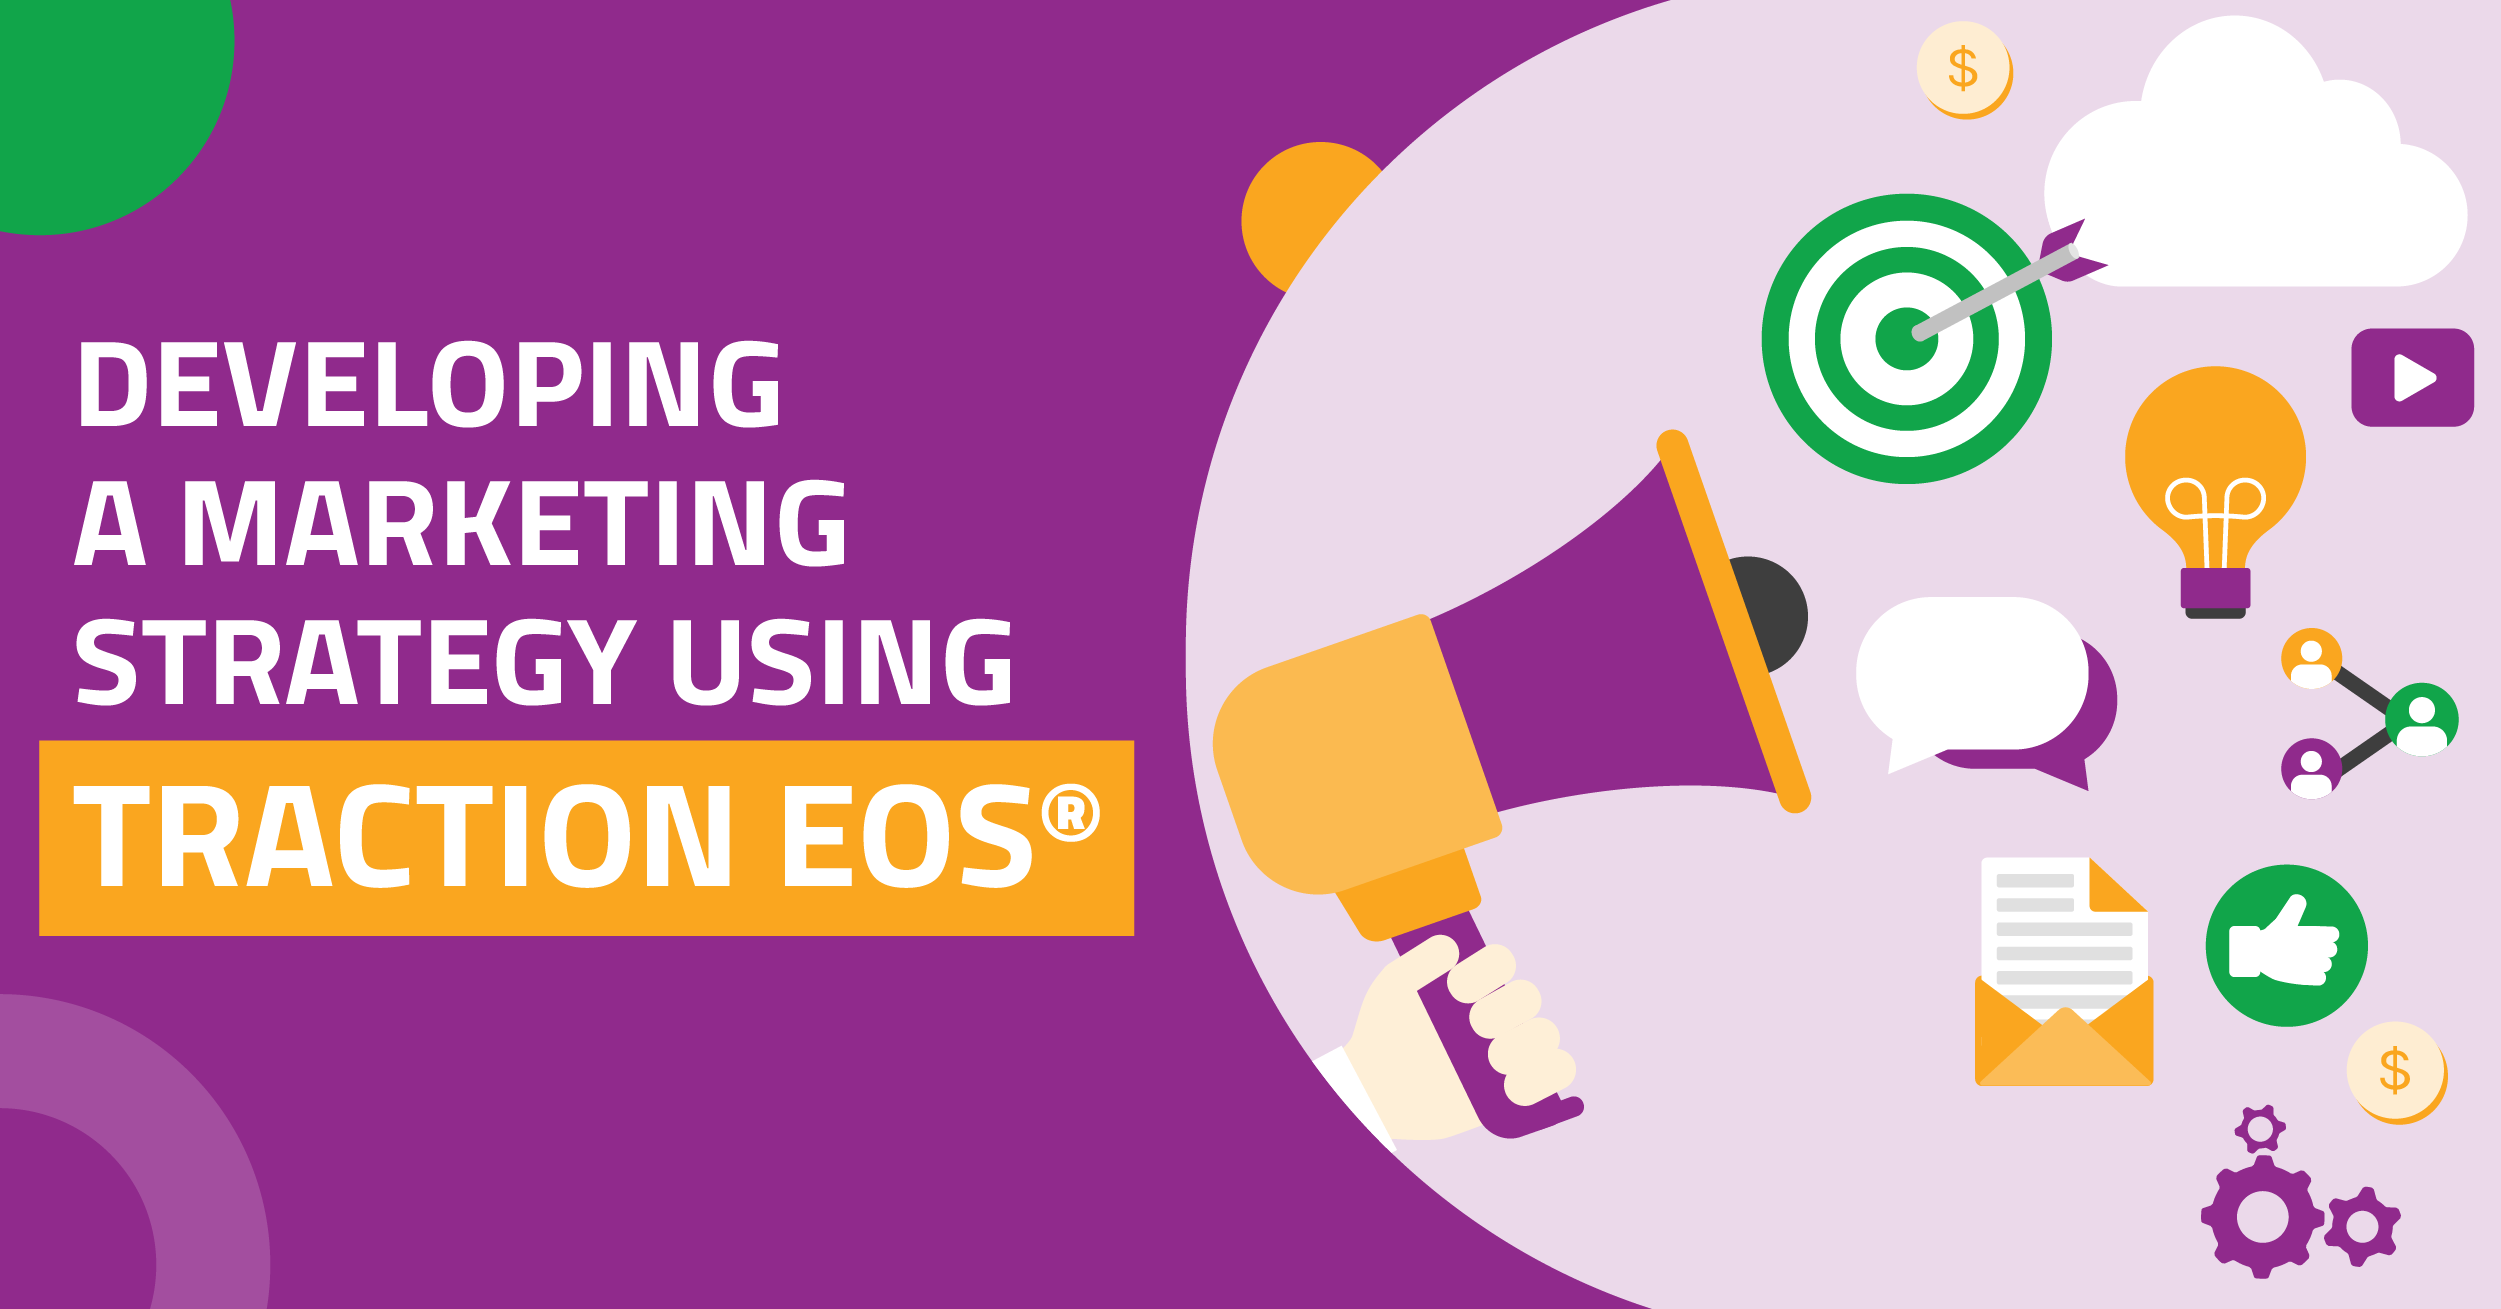 Developing A Marketing Strategy Using Traction EOS®